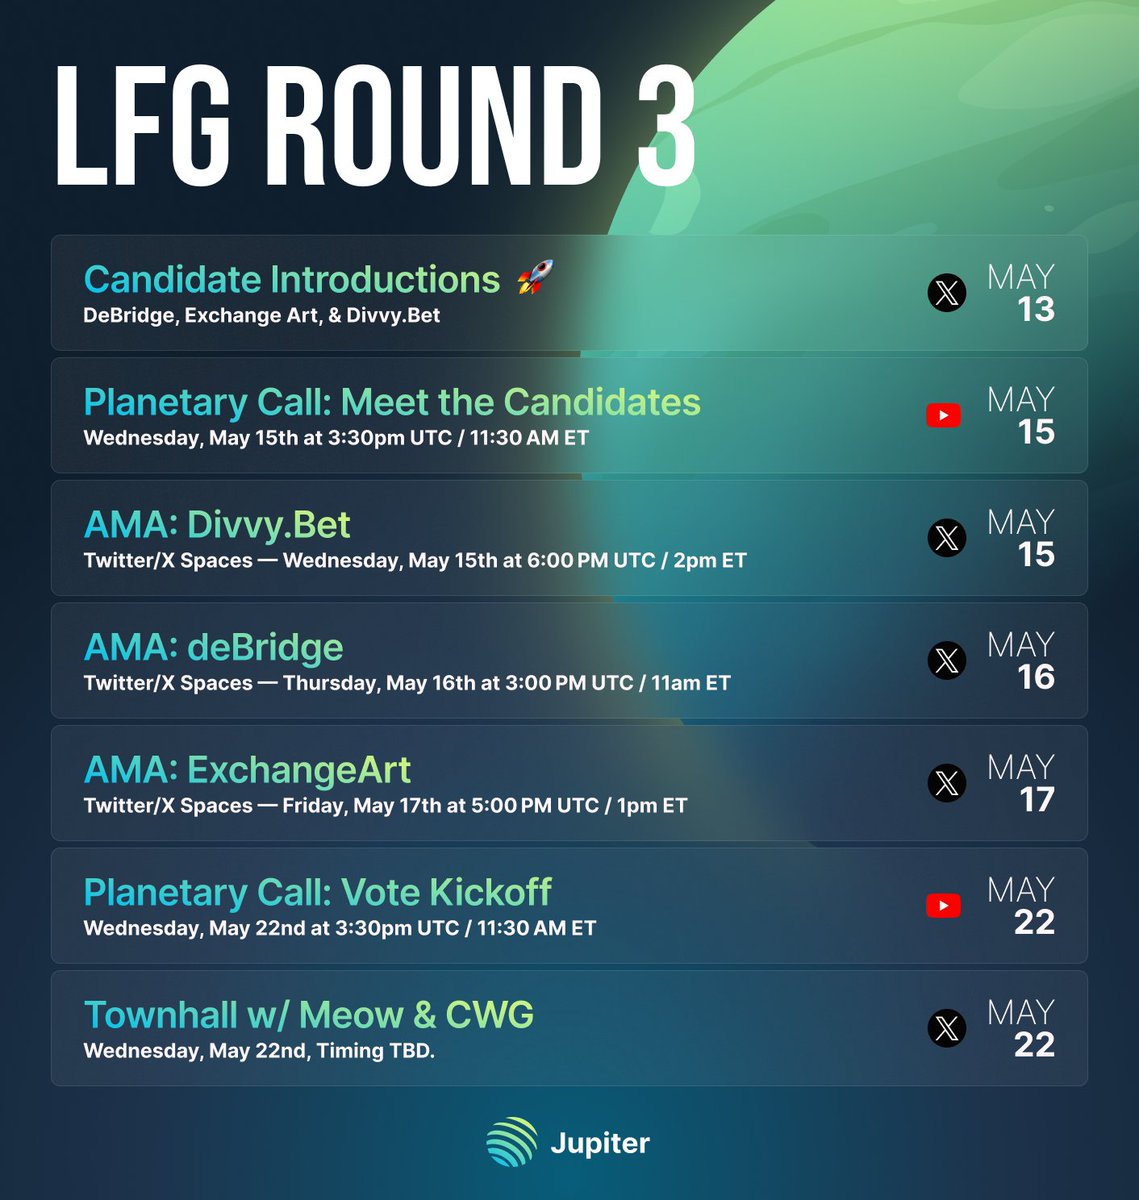 Introducing the candidates for LFG Round 3: @deBridgeFinance, @DivvyBet, & @ExchgART 🚀 They're going to be answering your questions, sharing their plans, and trying to win your support over the next 9 days Then, on May 22nd, it's time to vote! More about each team below 👇